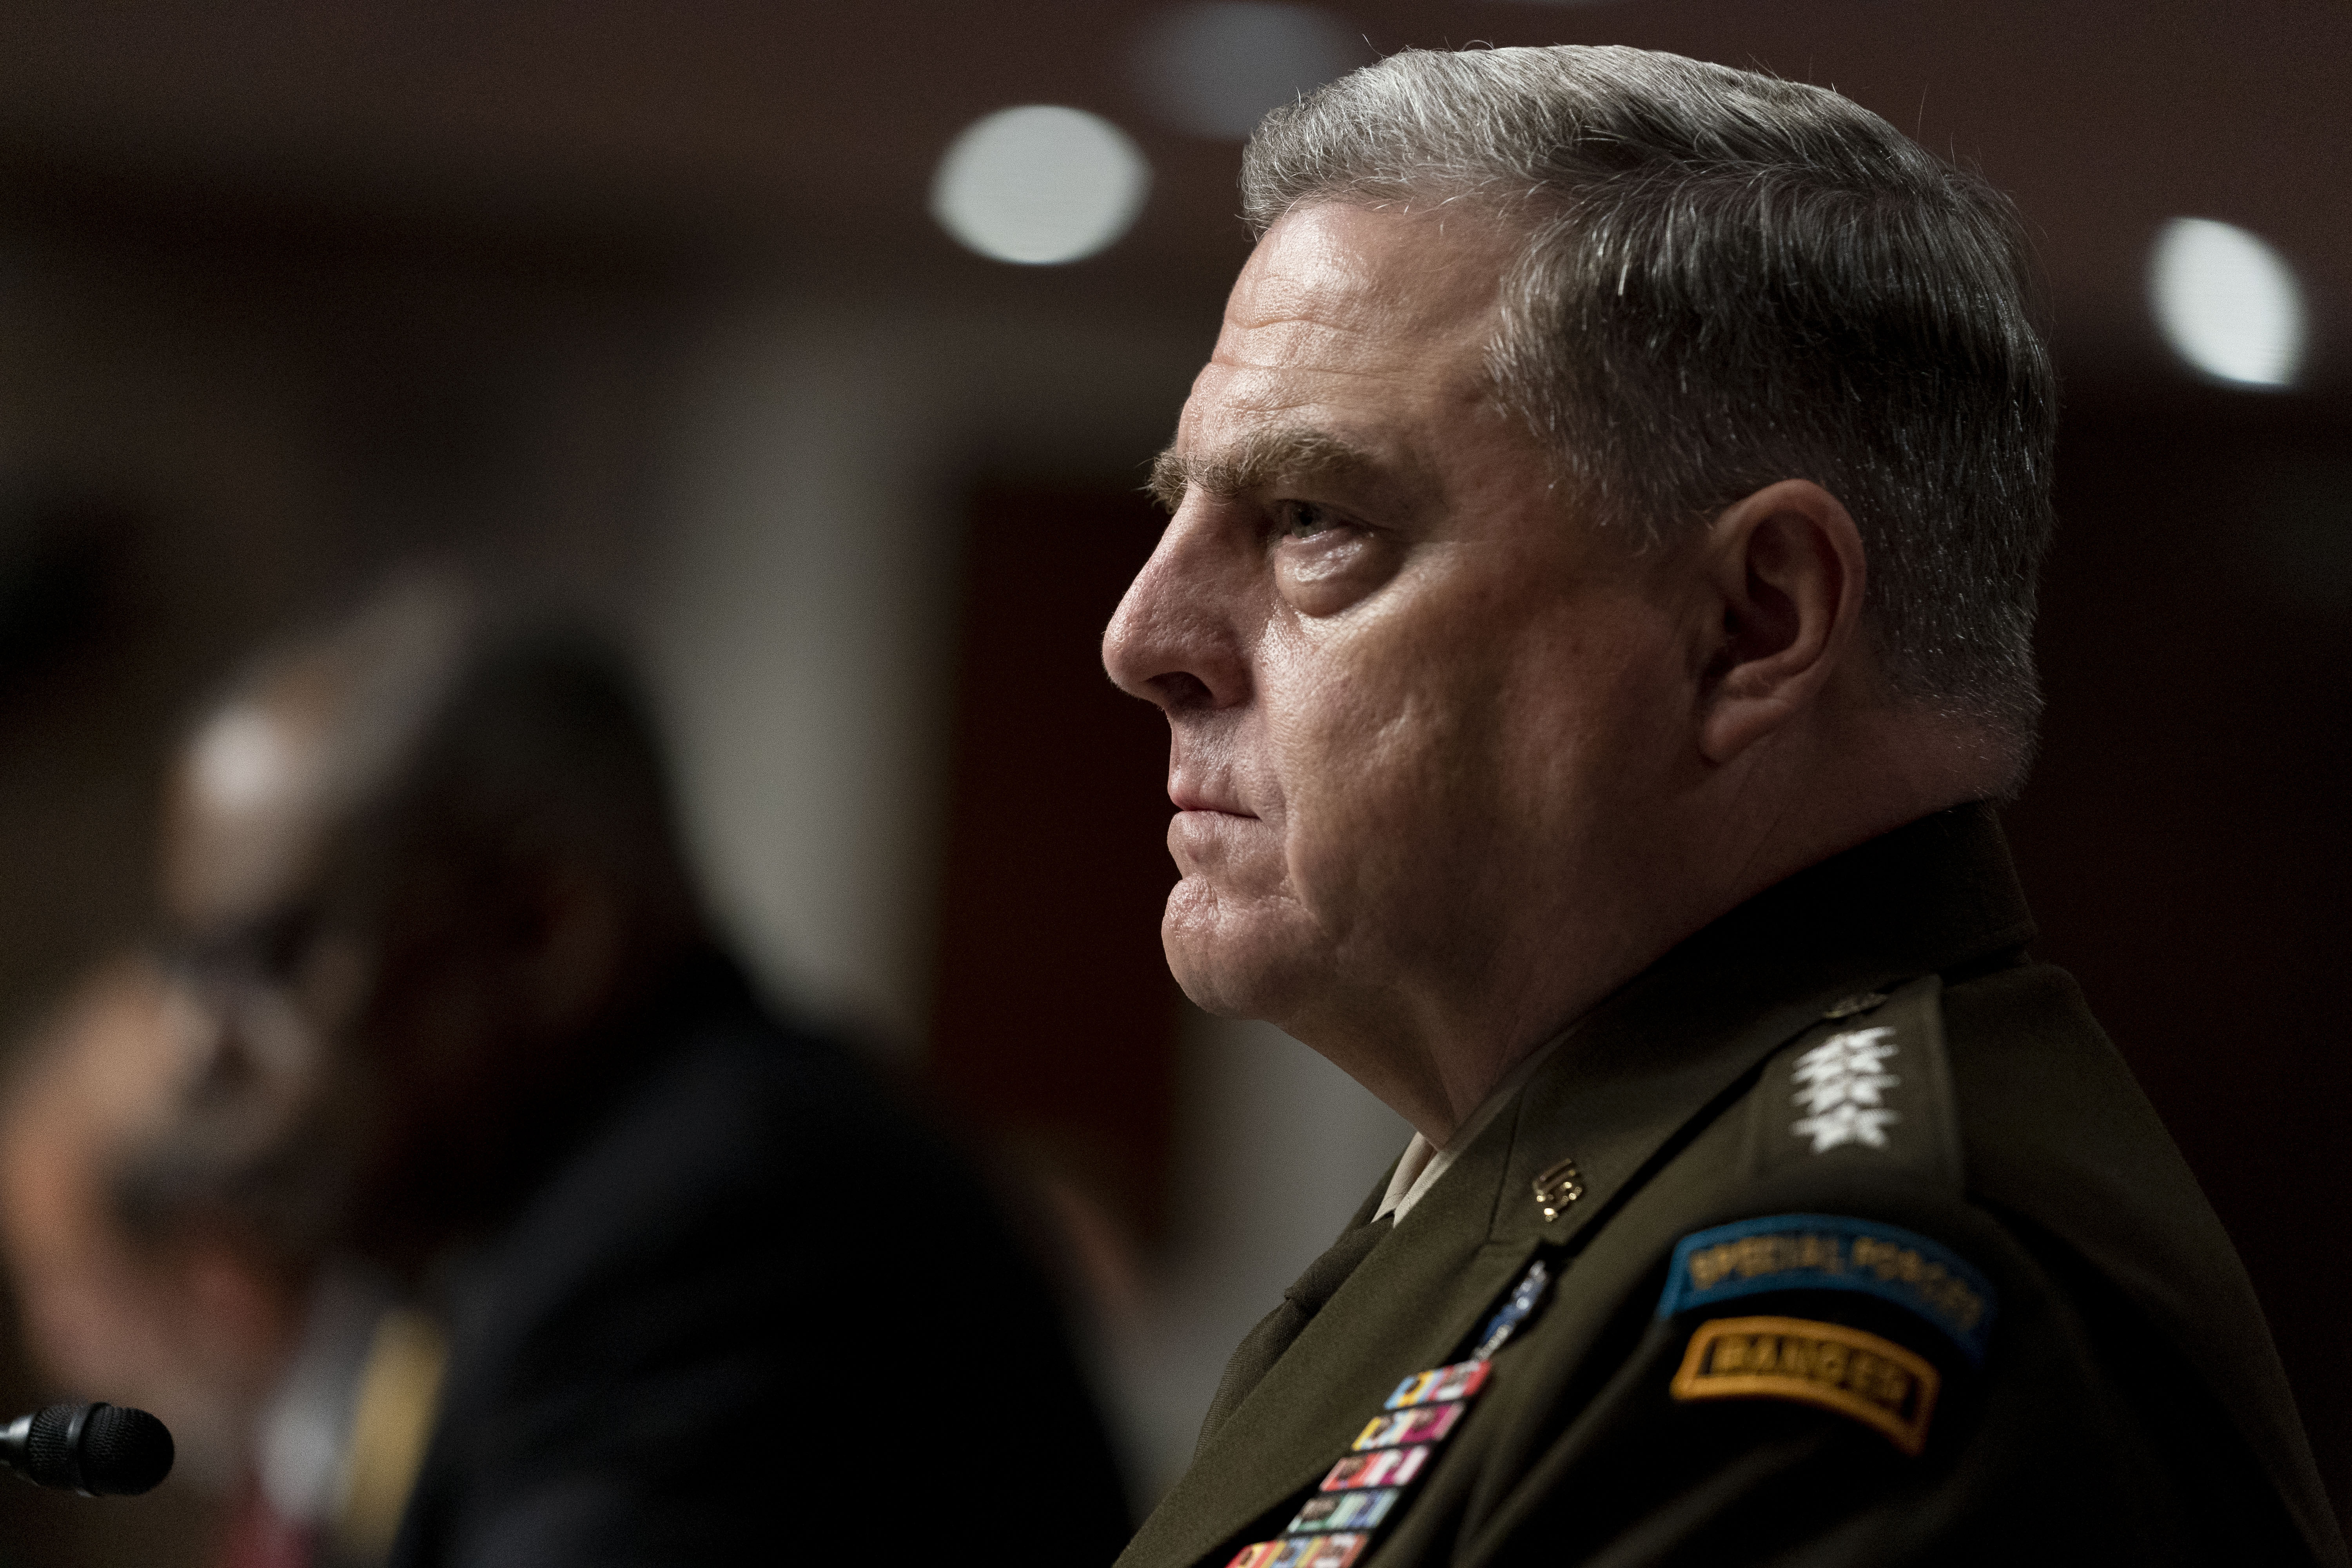 Top U.S. general defends freedom, democracy, ‘critical race theory’ against the right